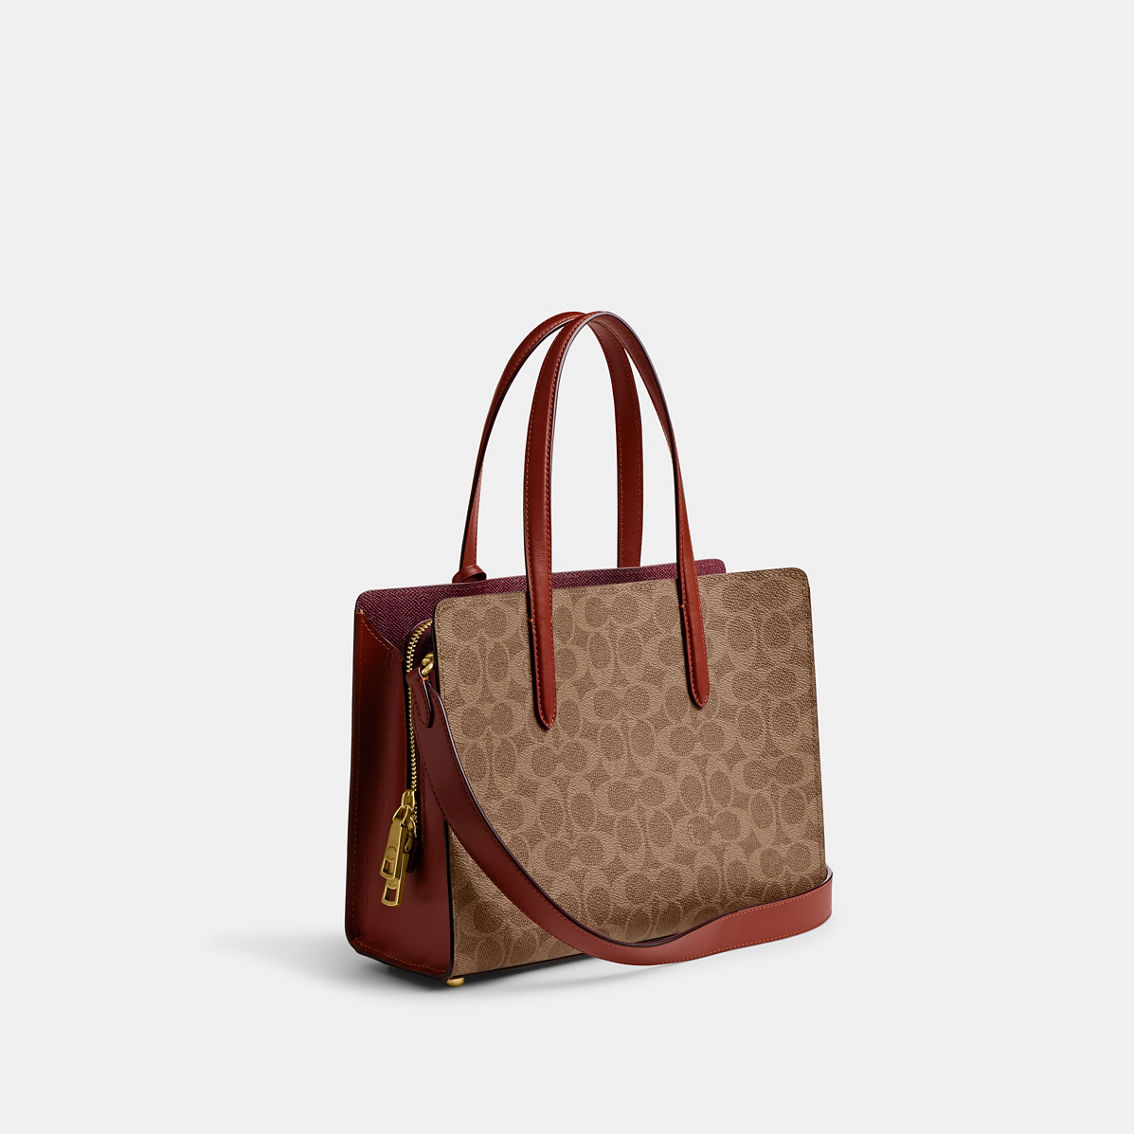 Coach Coated Canvas Signature Carter Carryall | Totes & Shoppers ...